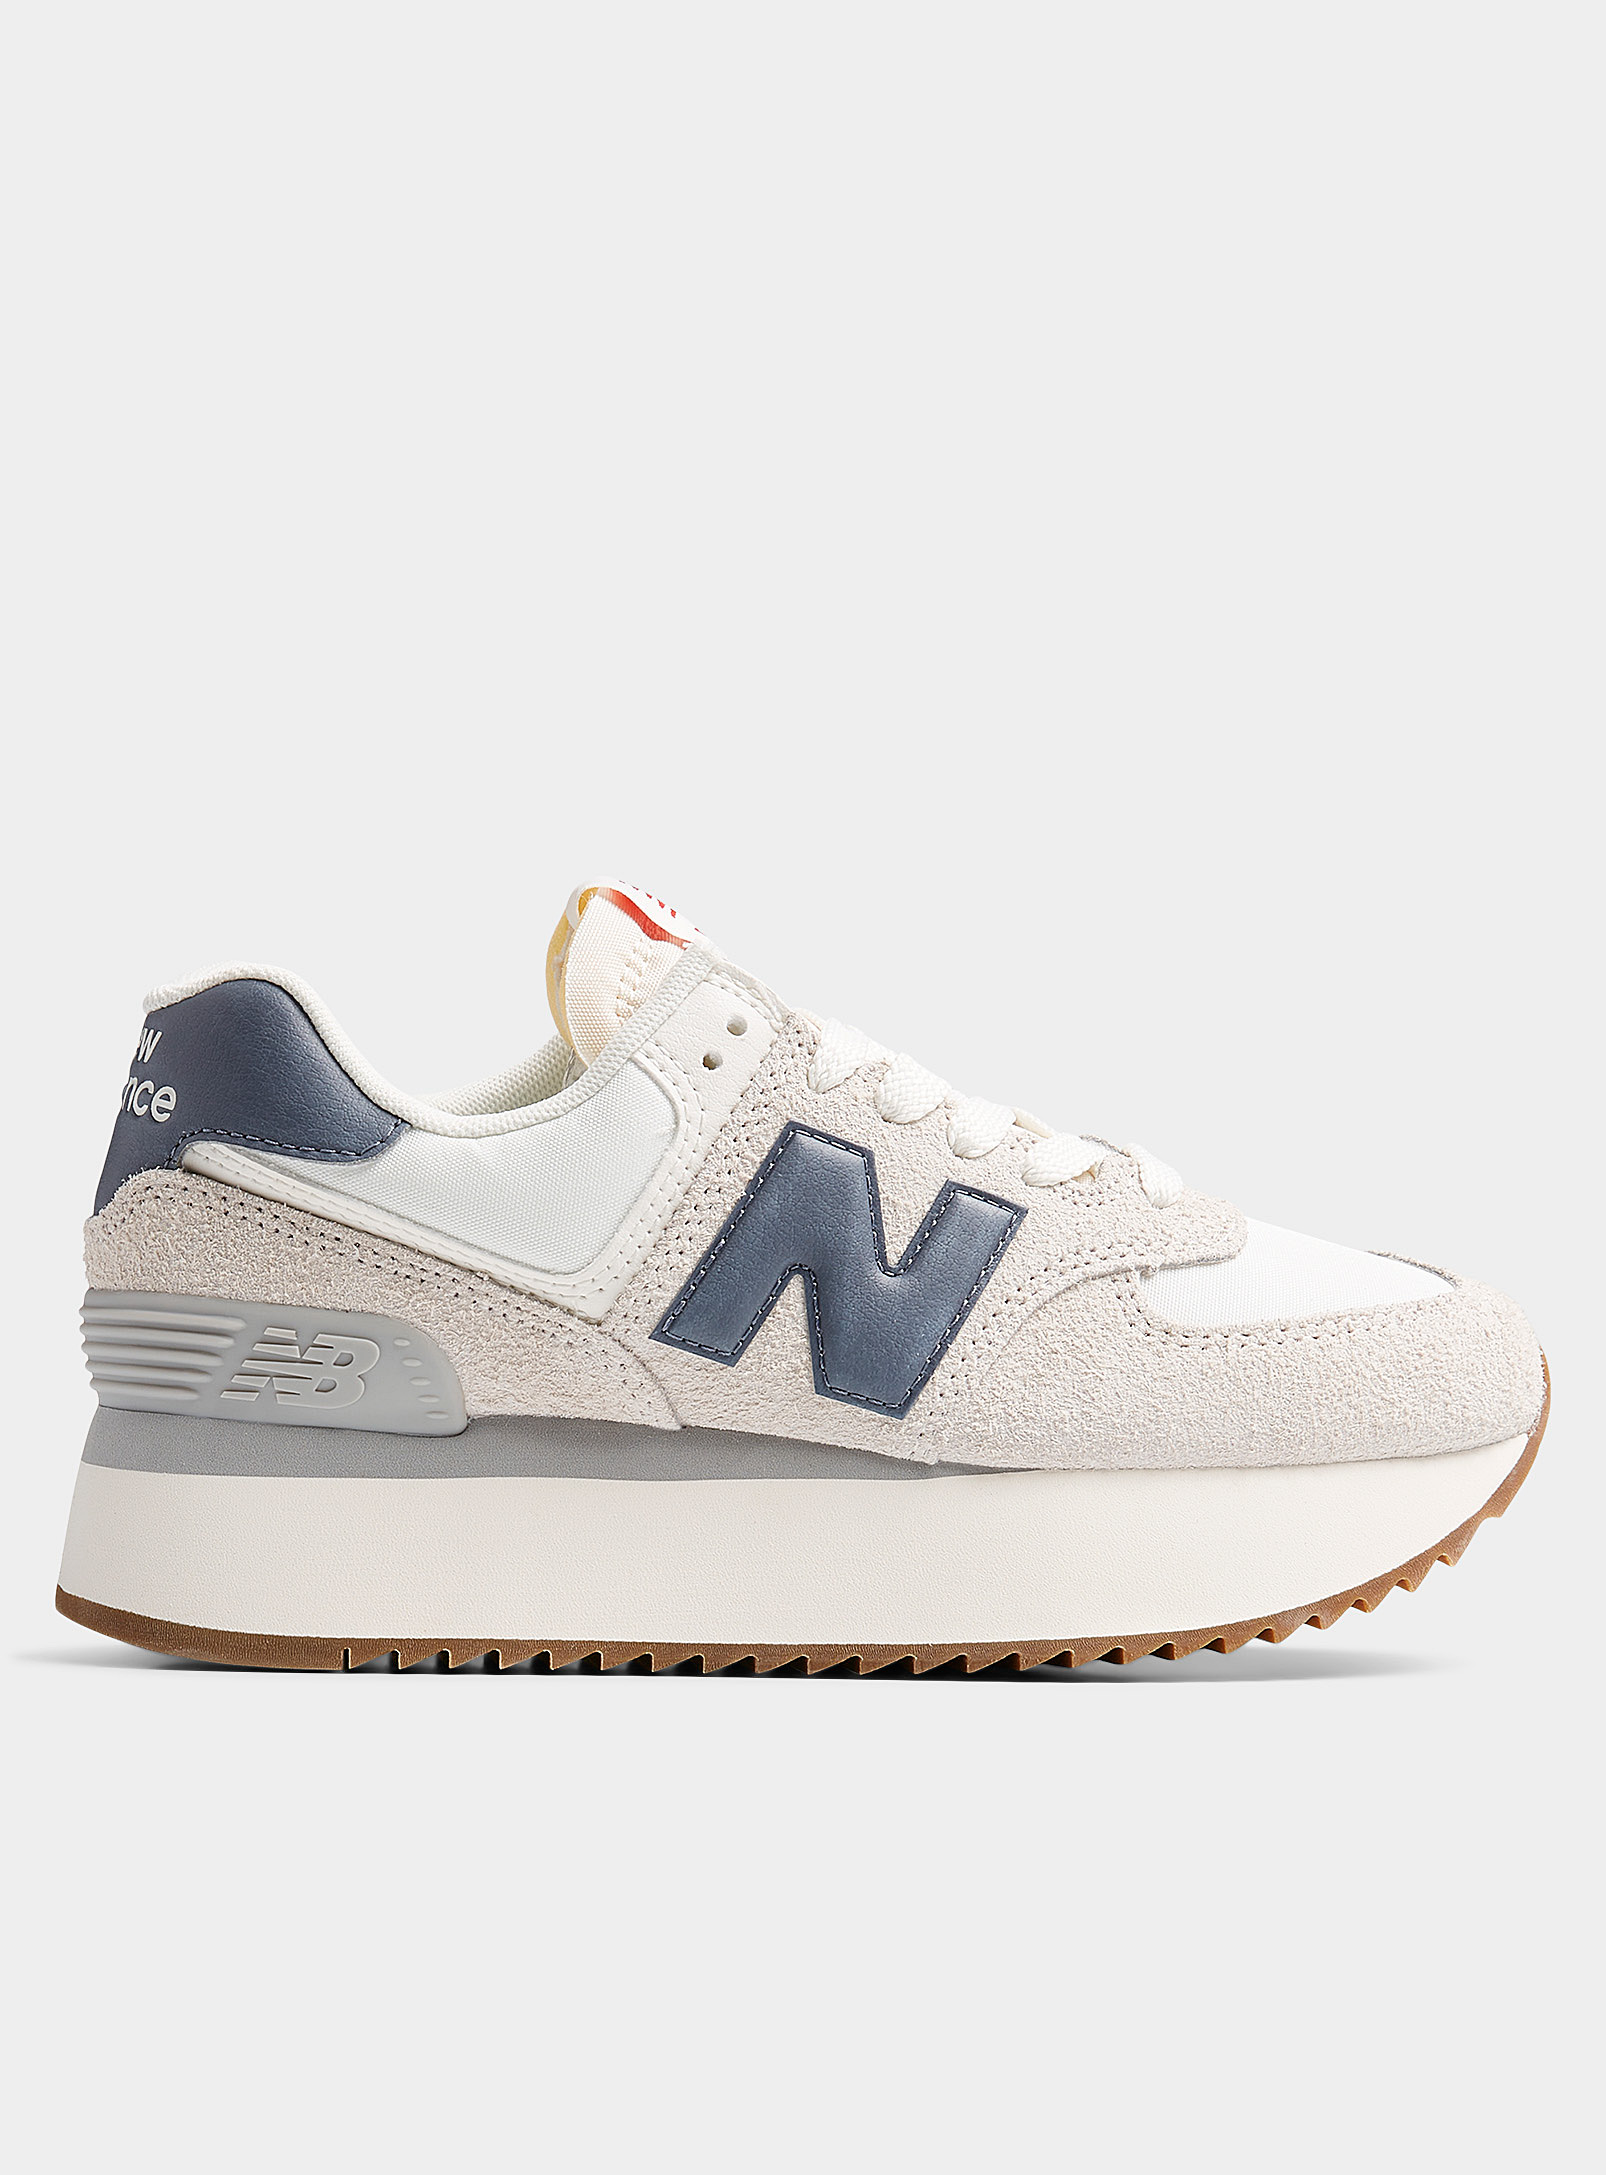 New Balance - Chaussures Le Sneaker plateforme 574+ Femme